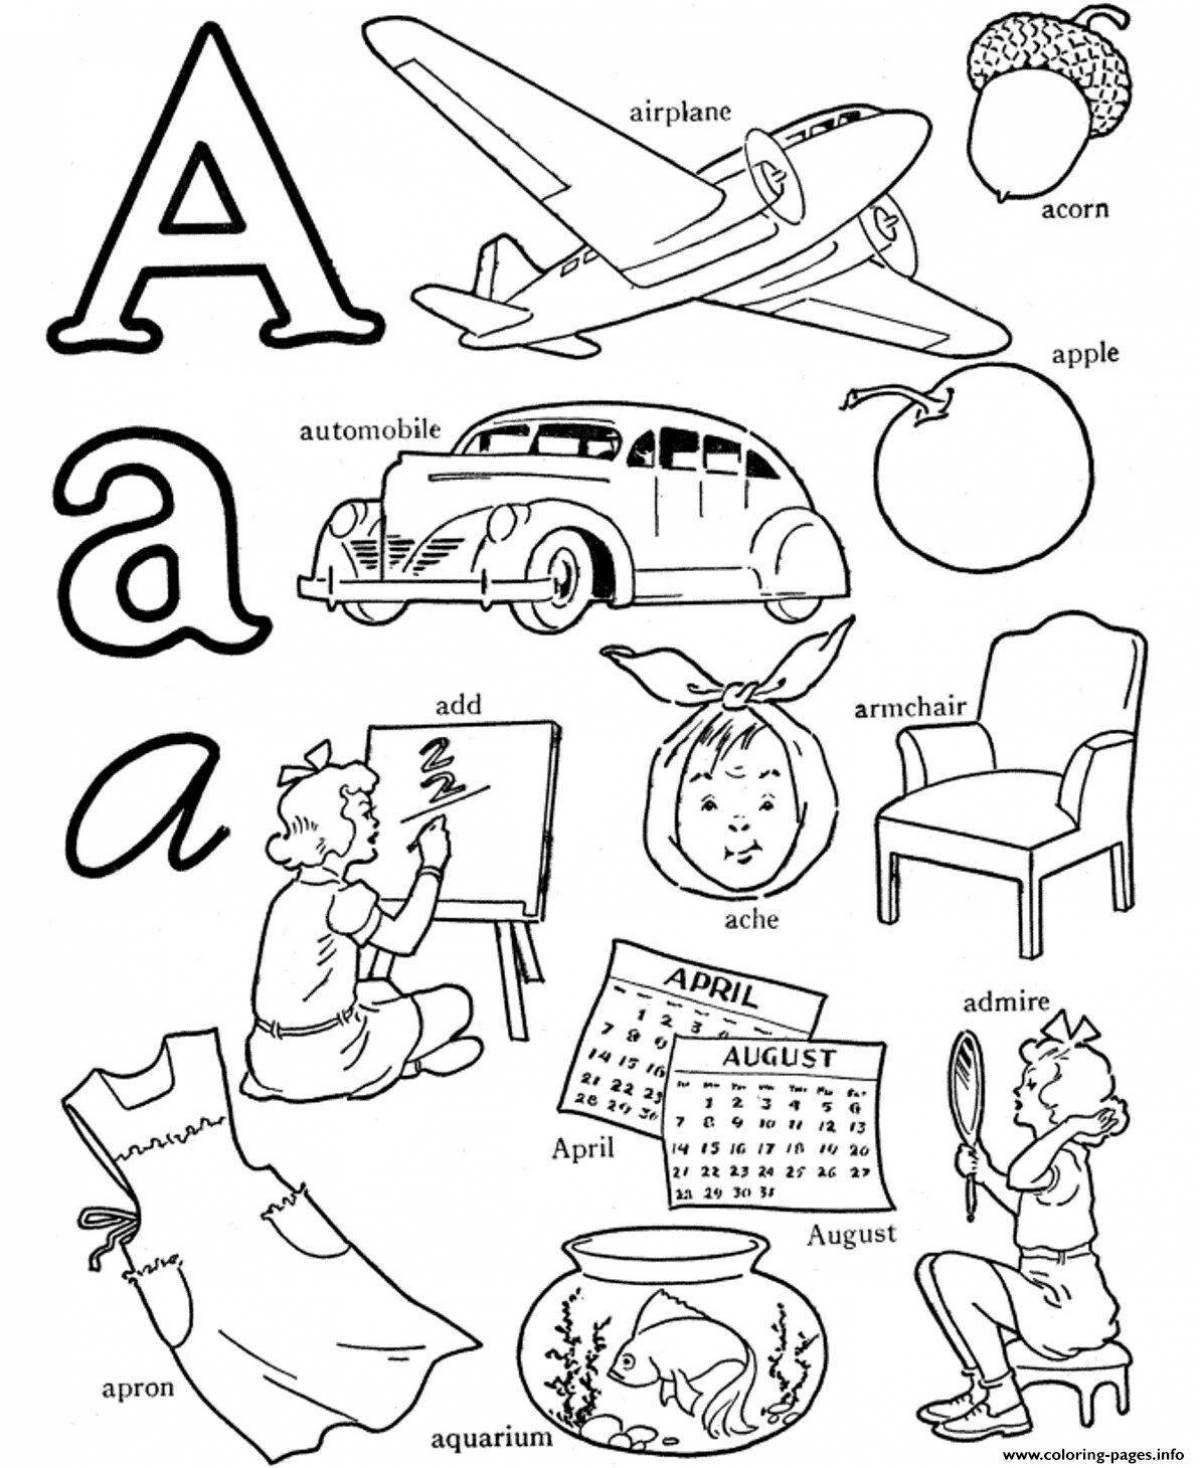 Happy coloring book for memorizing letters